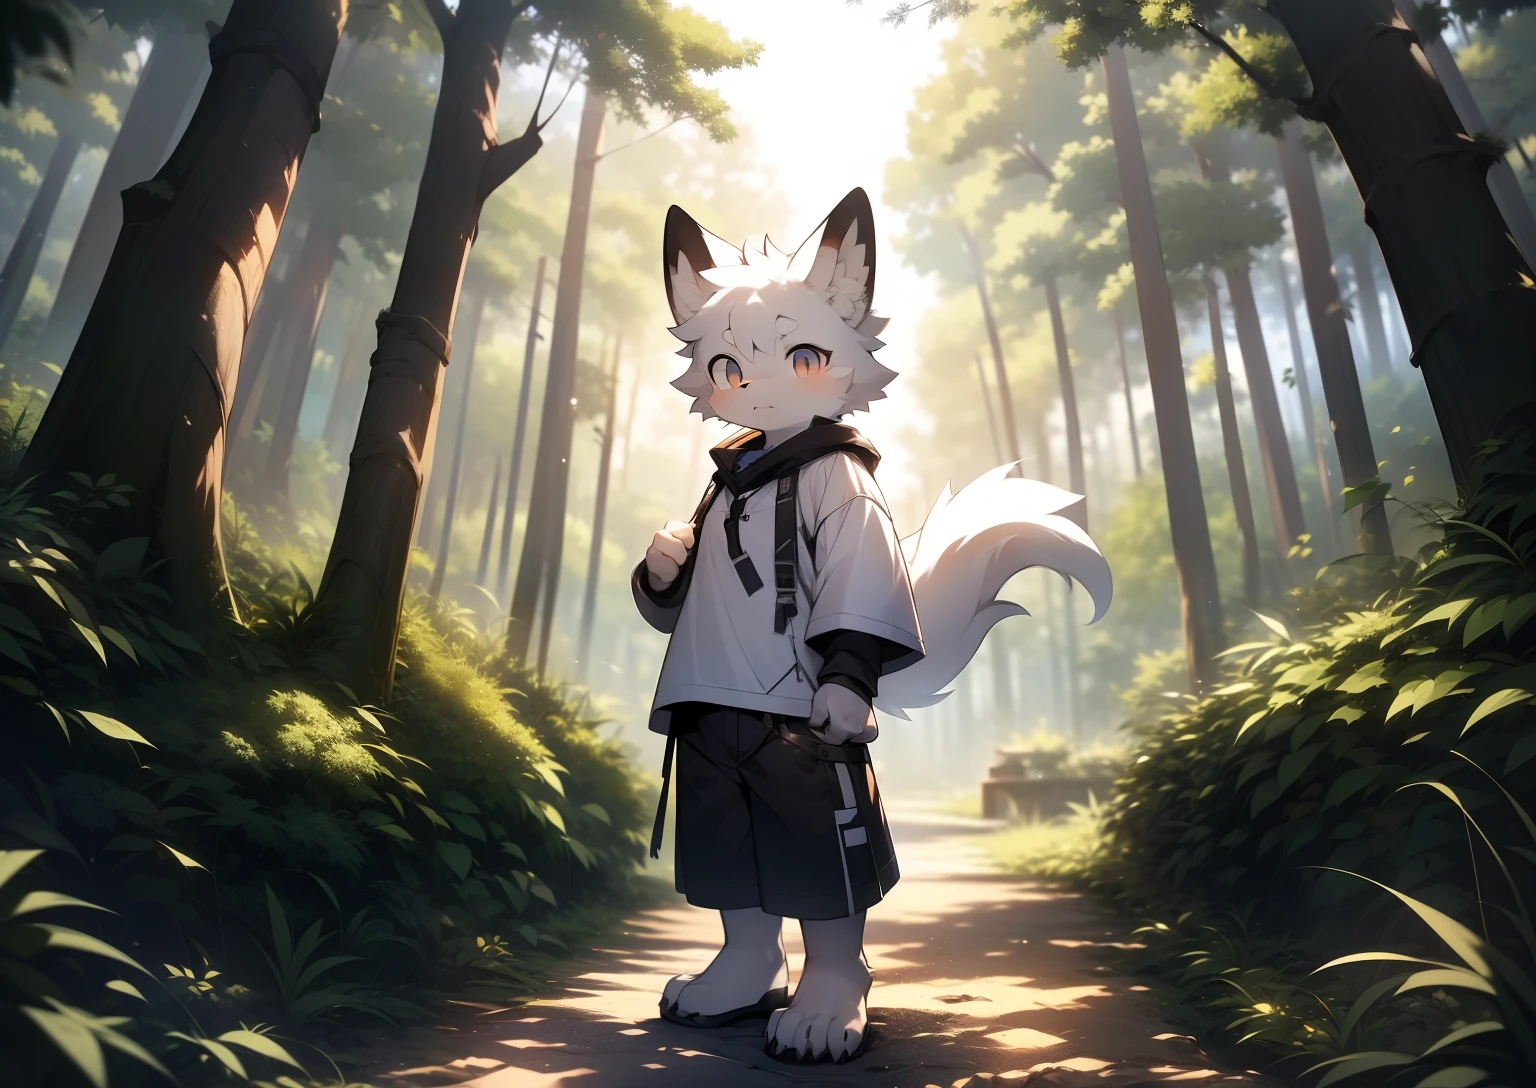 Libido boy，furry wolf，((shota)), Black and white hair, Very good figure, Handsome，adolable, Light：Extreme light and shadow, Reflective skin,Reddish skin，((worn-out clothing，Commoner)) ，((Deep in the forest，Stone path，Signs，solo，solo person))，Outdoor sunset，((the detail))，（depth of fields），standing on your feet